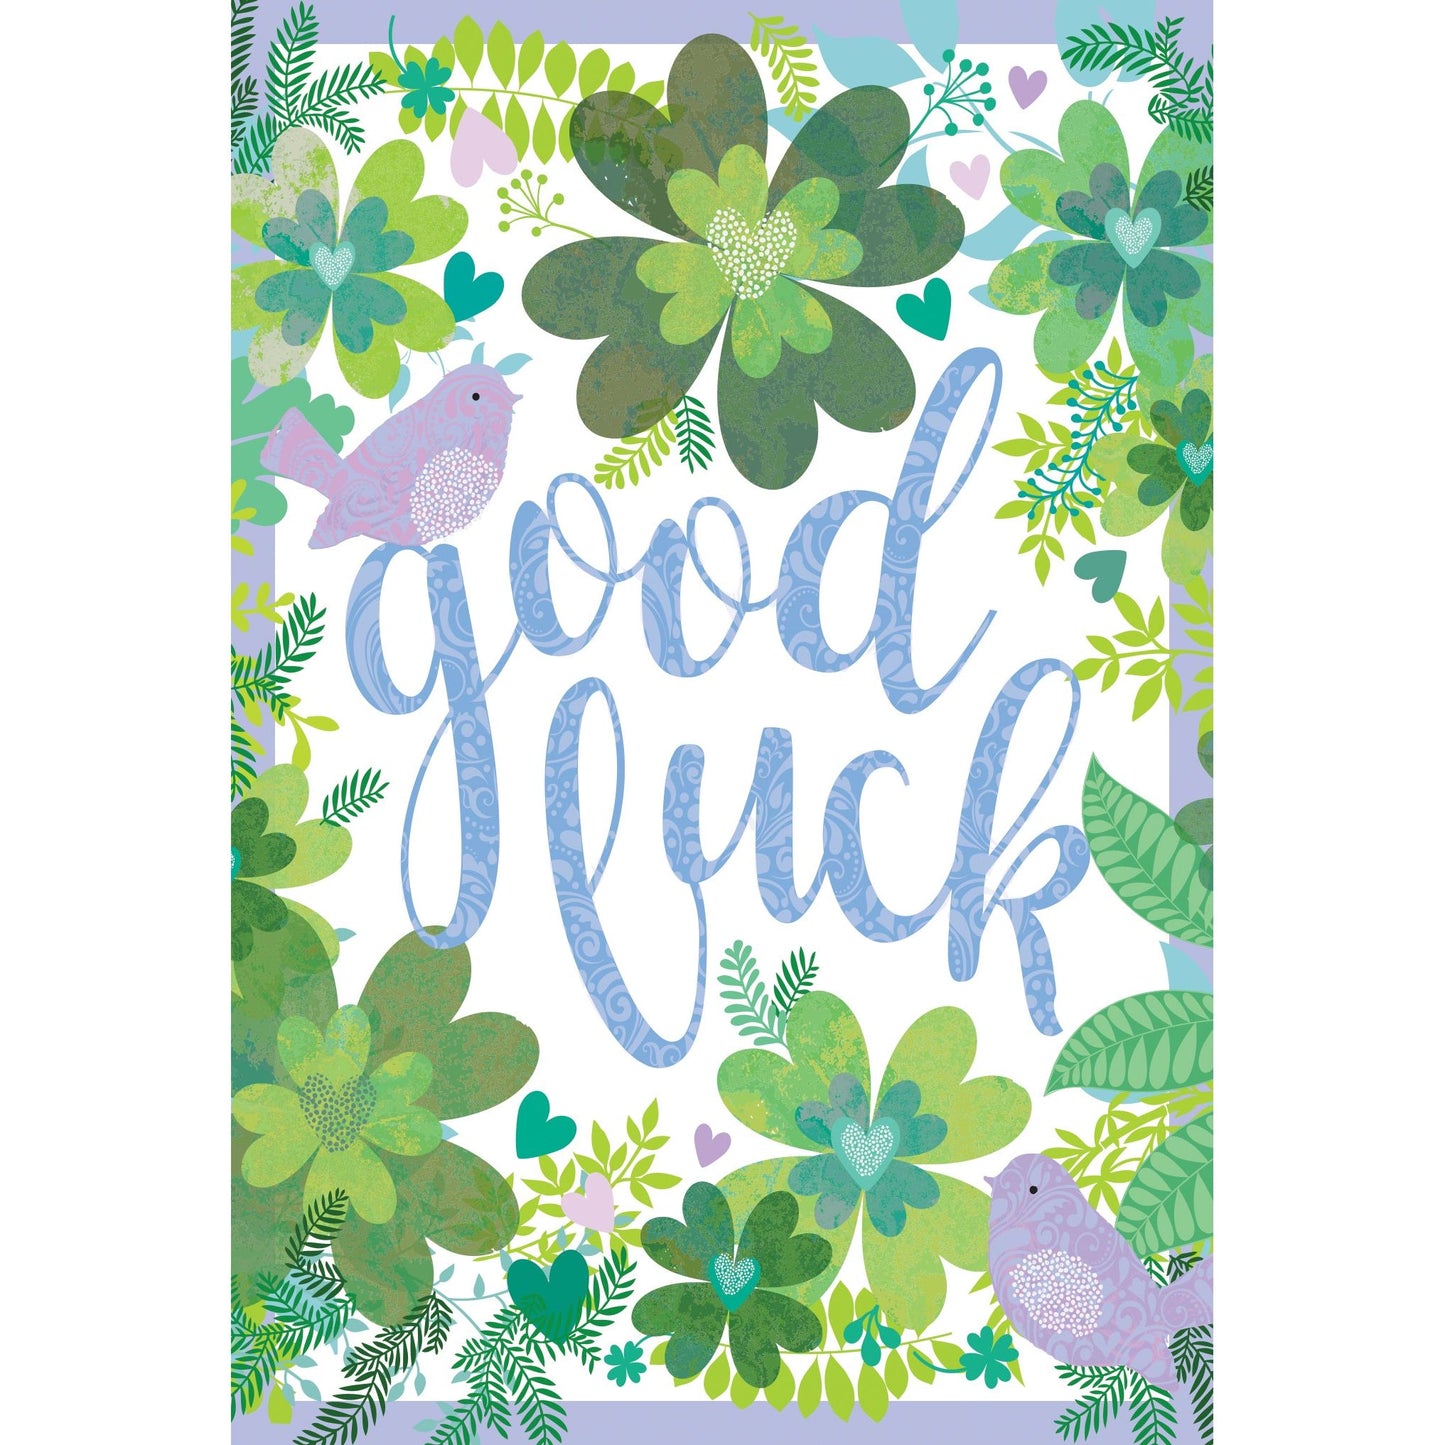 Good Luck Card Wish you the very best - Cardmore